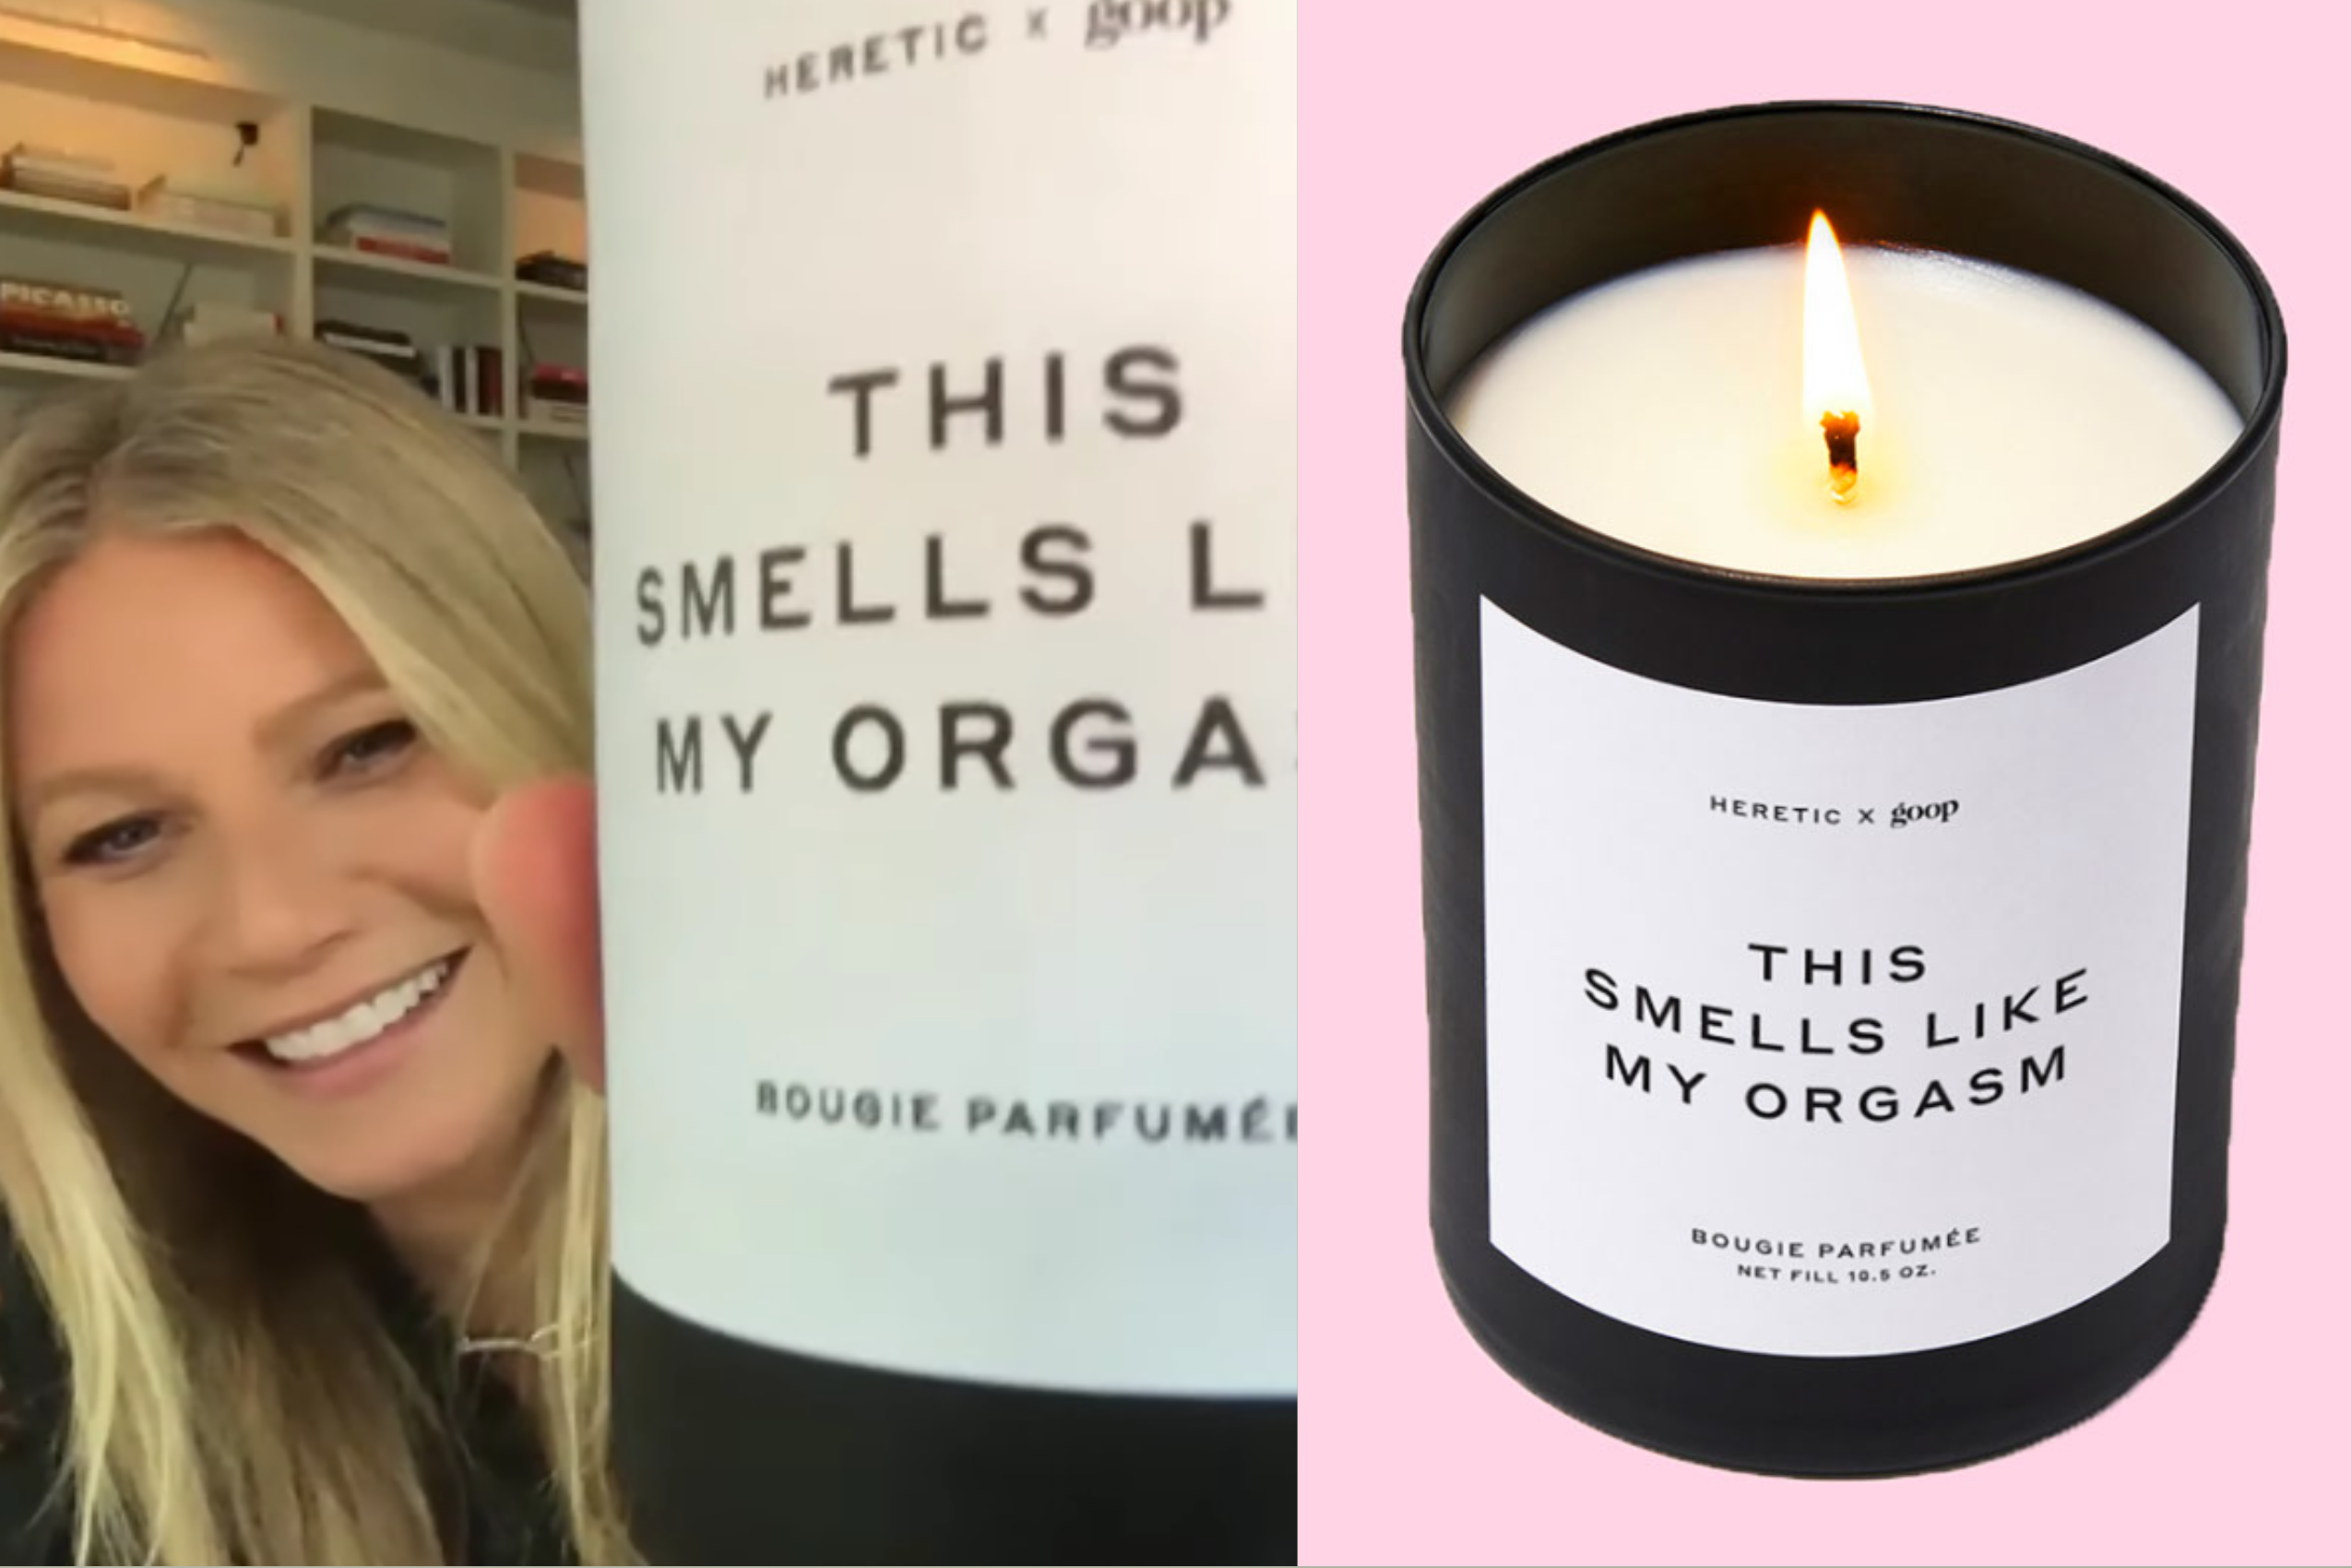 Goop Has Released A New Orgasm Candle, Which Will Look Lovely Next To The Vagina Candle